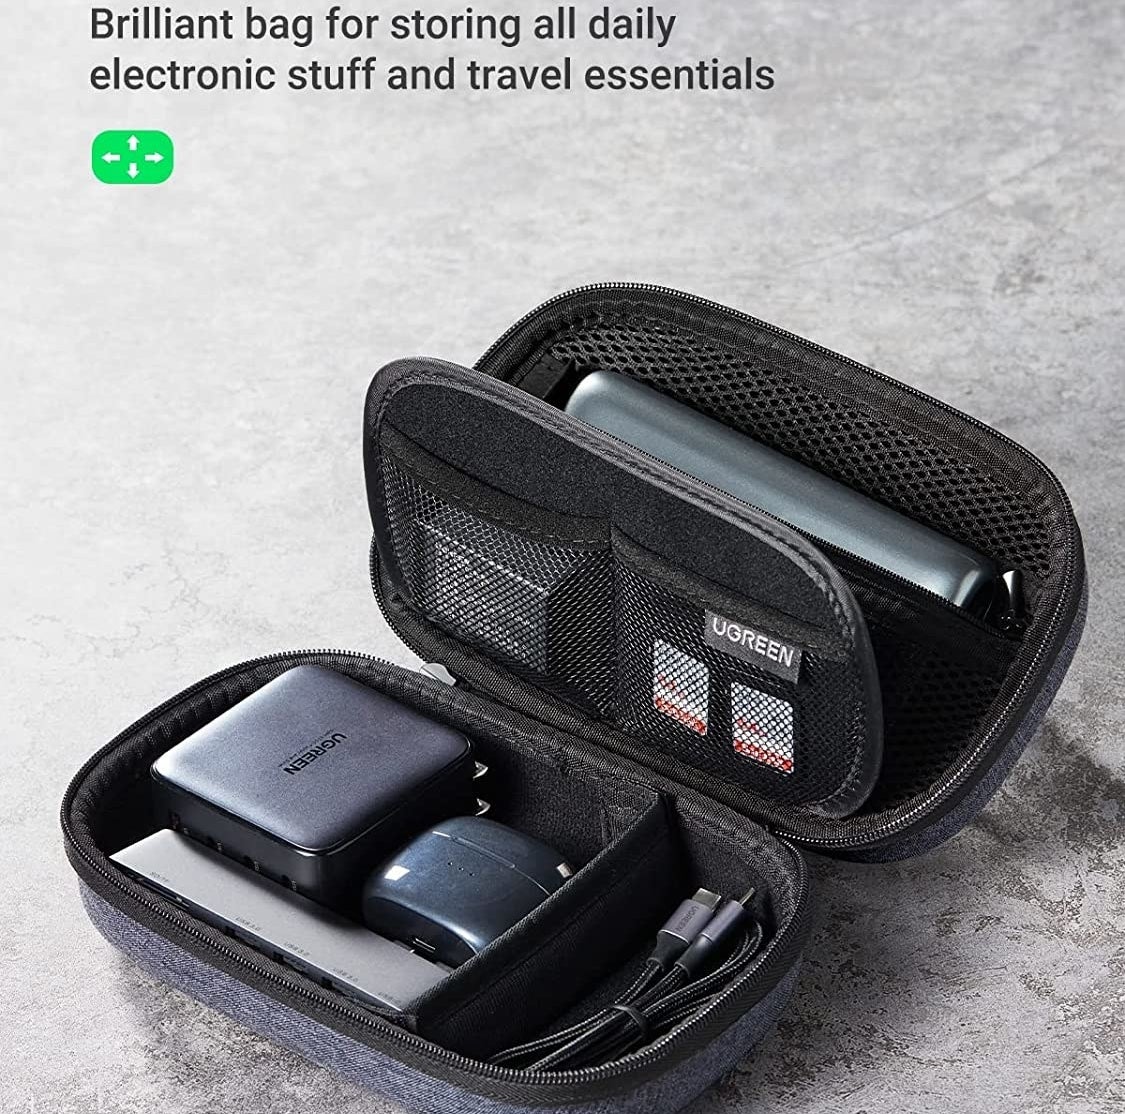 The pouch open and displaying electronic accessories